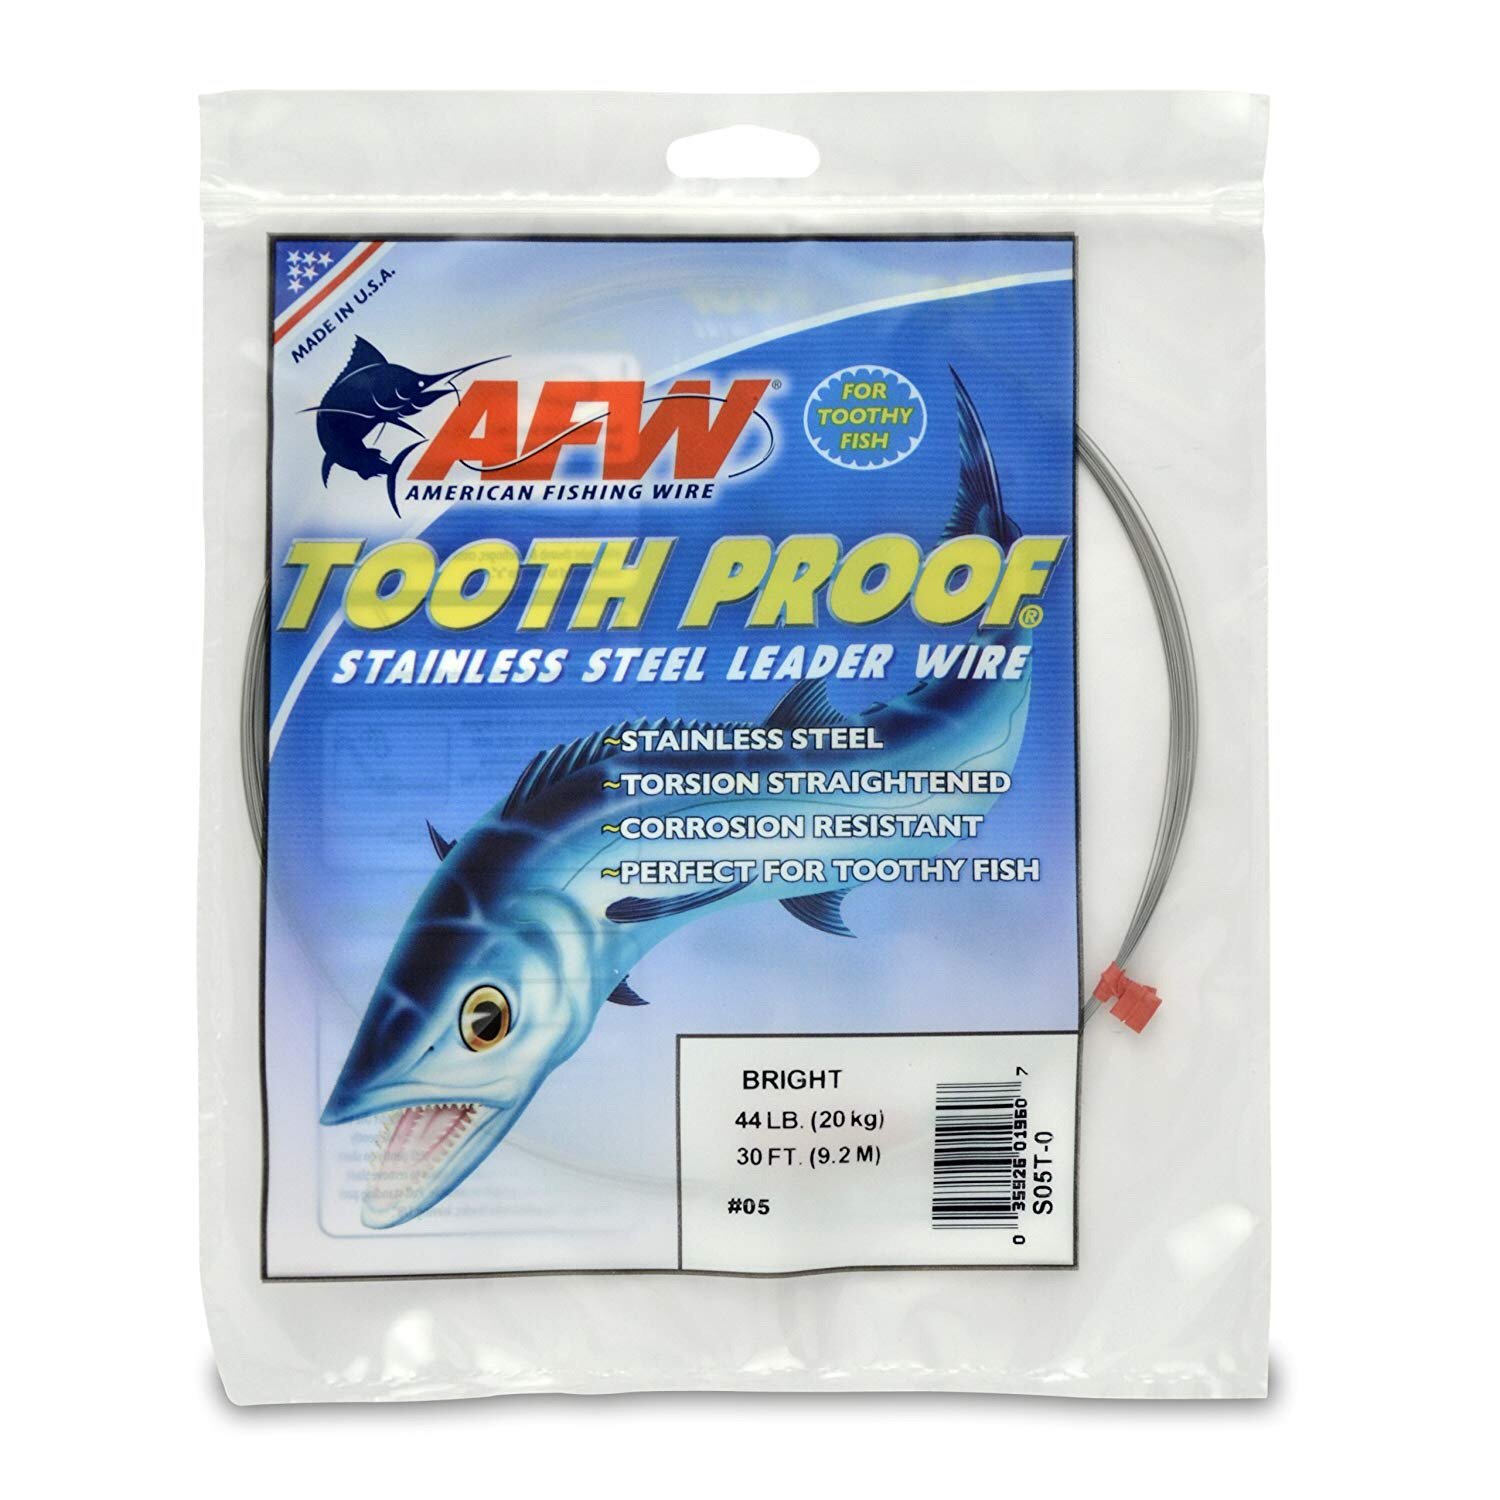 American Fishing Wire Tooth Proof Stainless Steel Leader Wire 30ft - Salt  H2O Custom Tackle Fort Lauderdale Florida